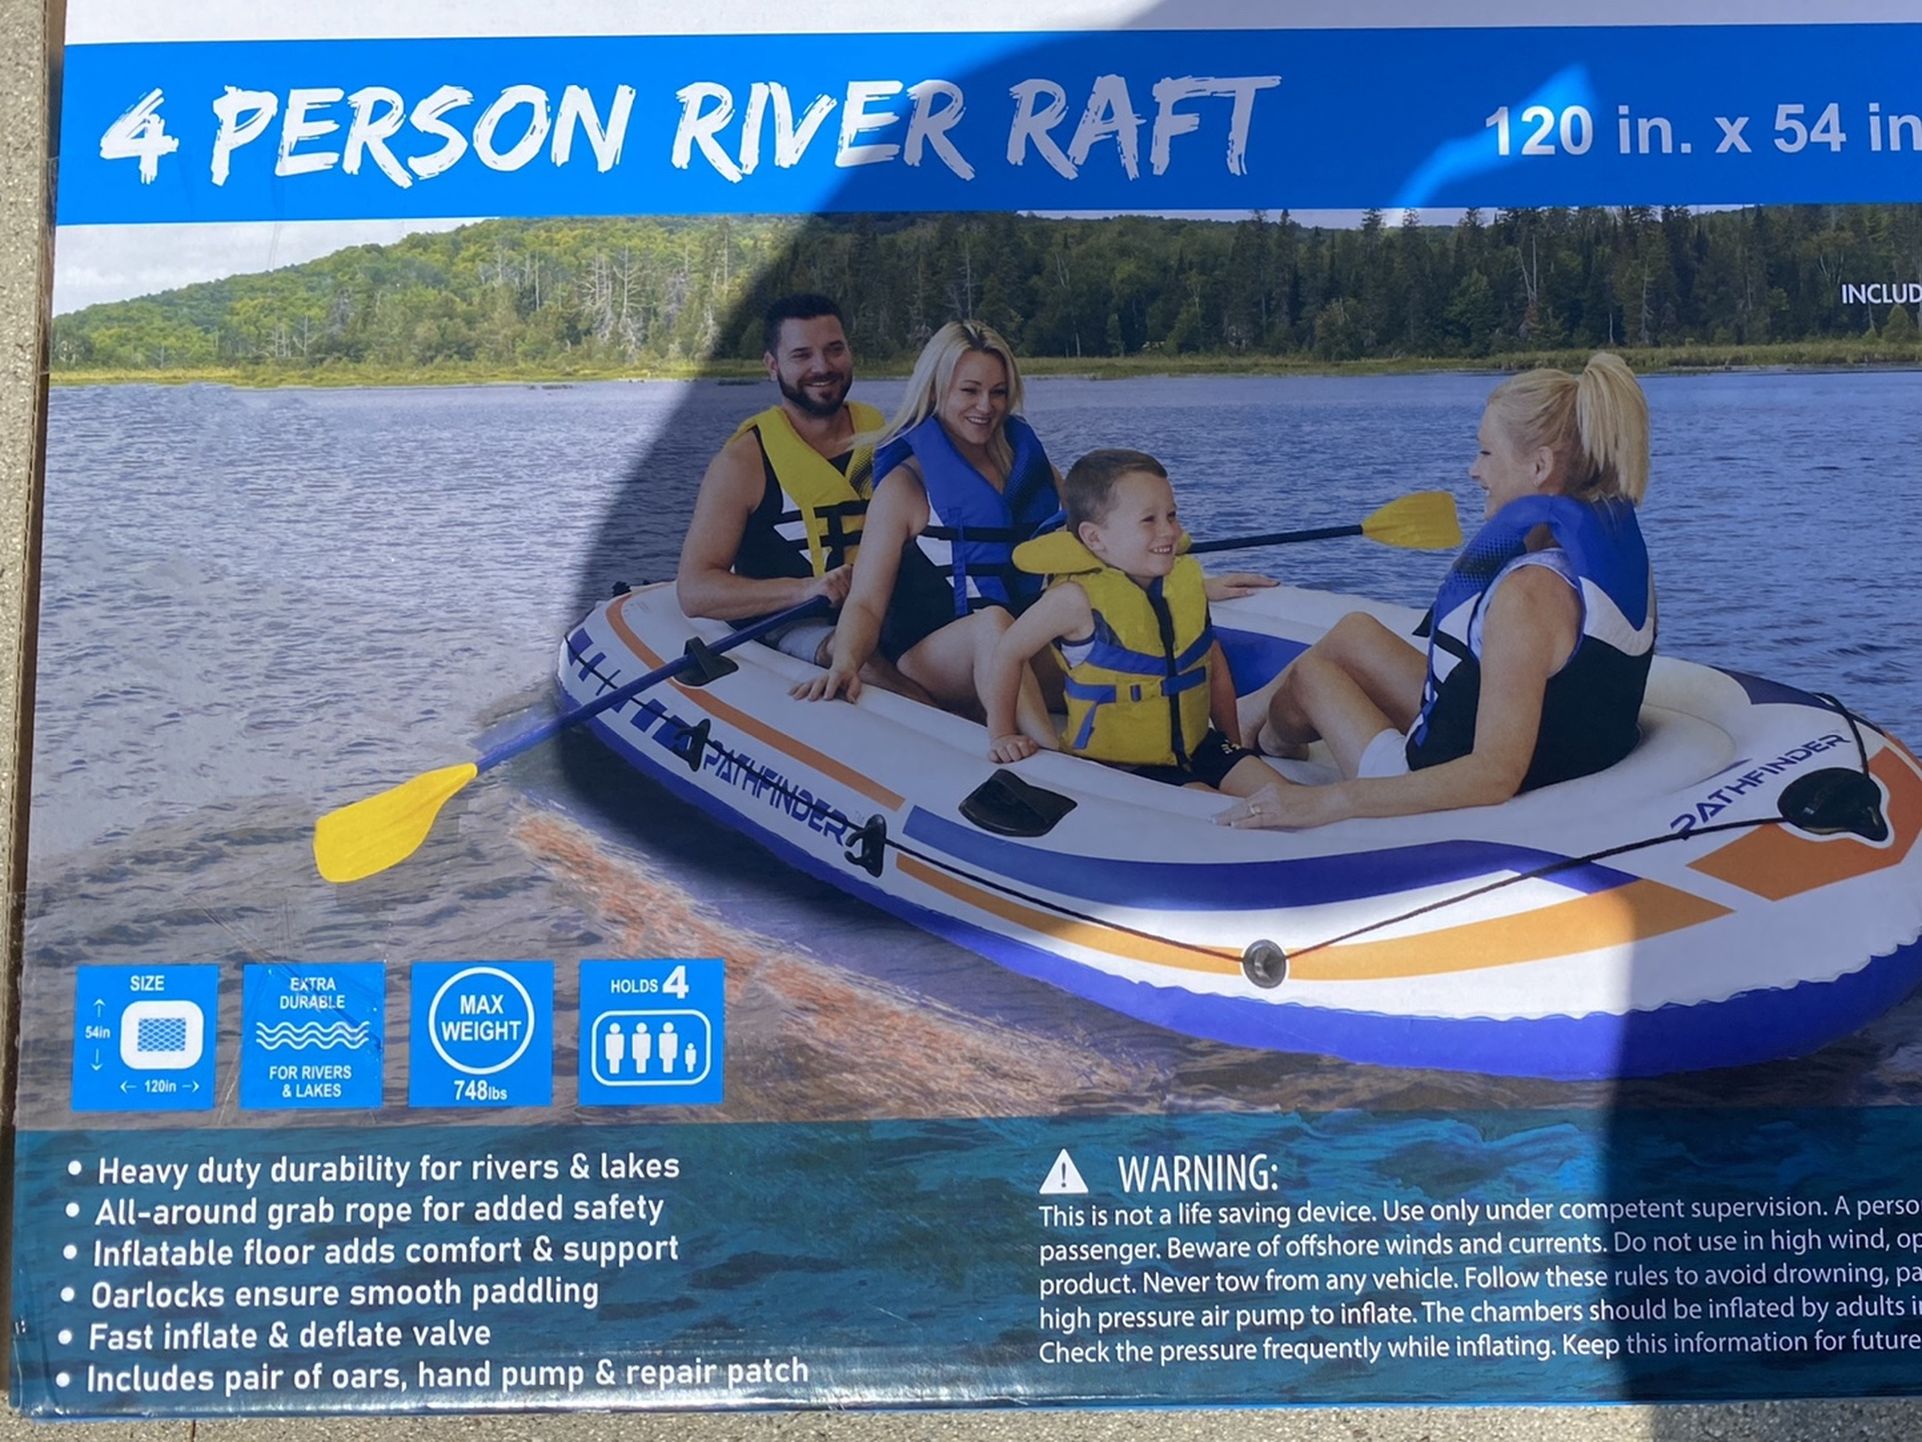 4 PERSON RIVER RAFT (INFLATABLE)